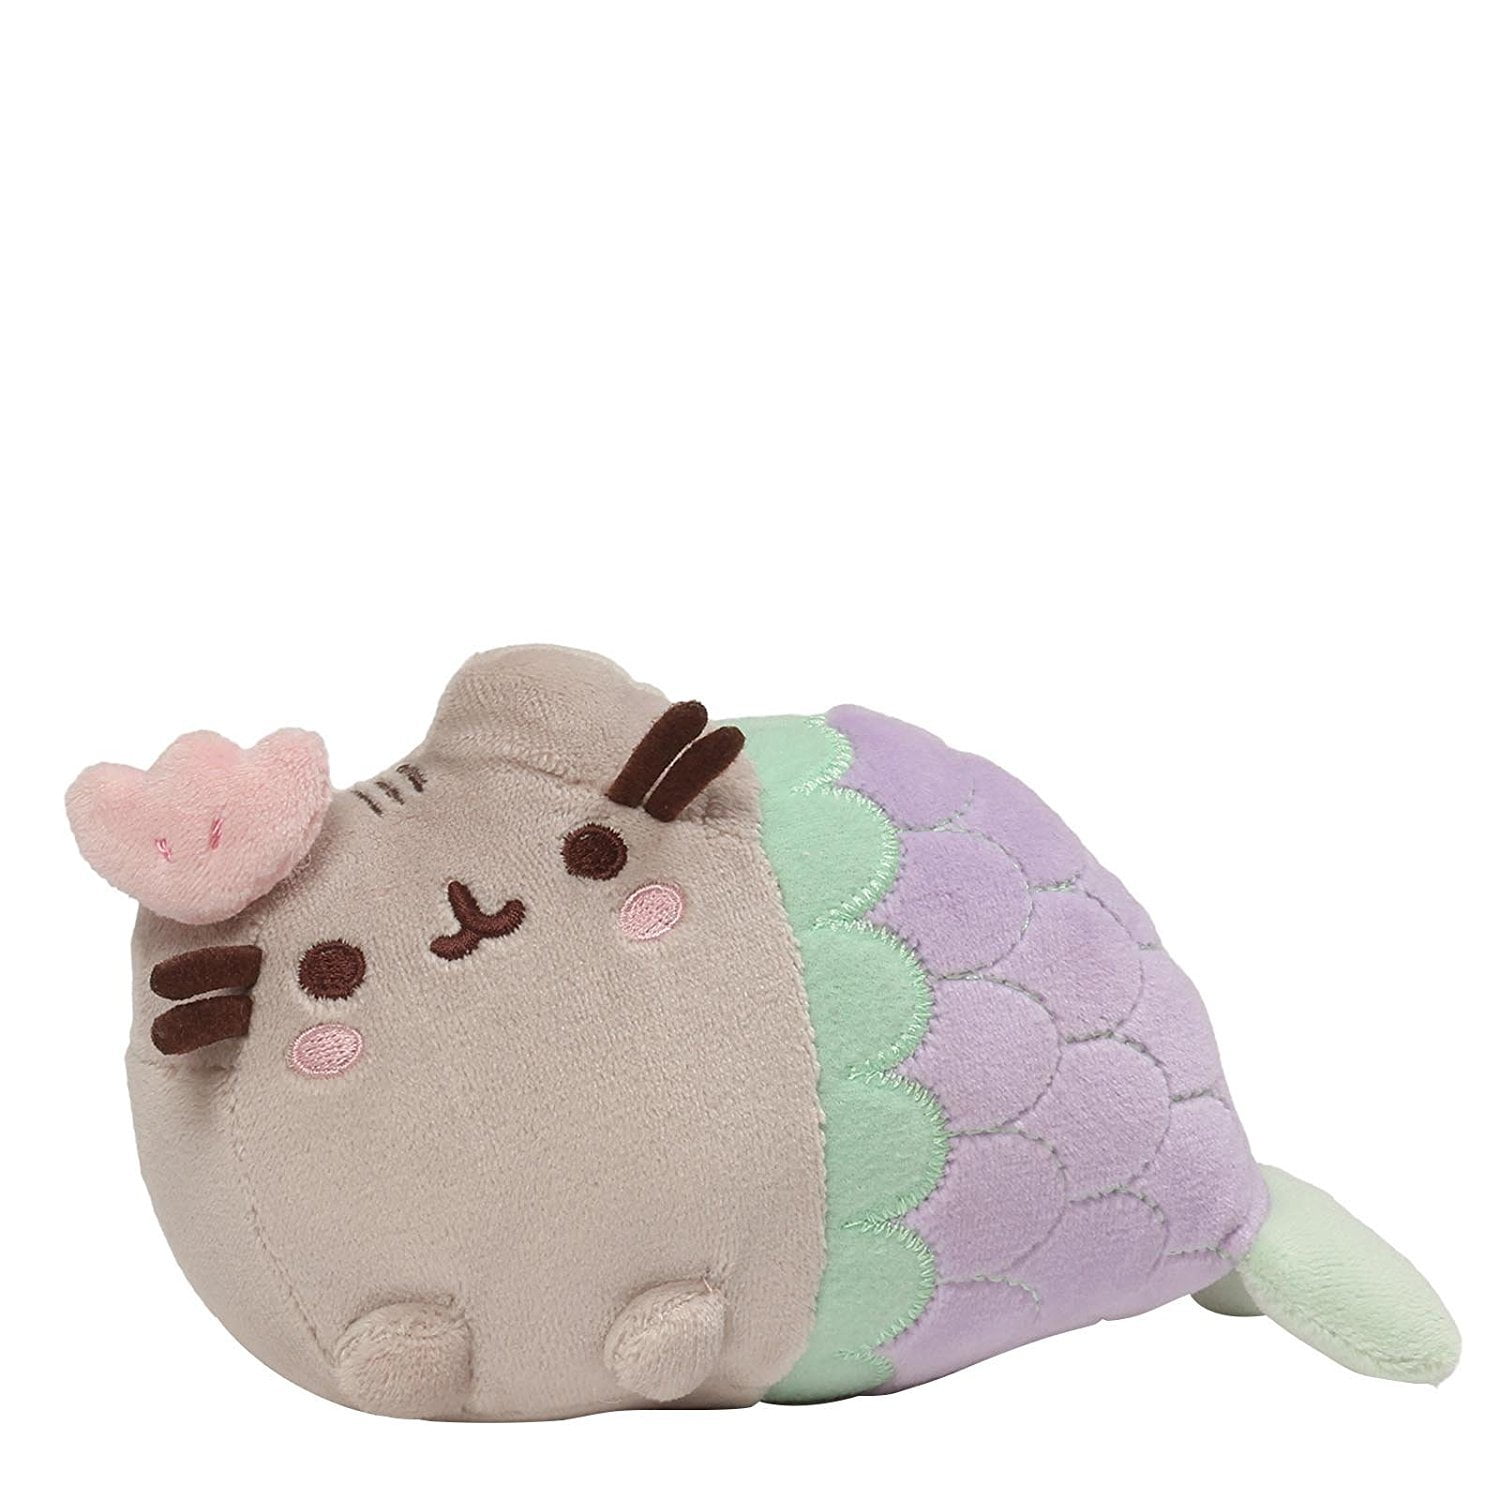 GUND Pusheen The Cat and Stormy as Mermaids Collection of 4 Mini Plush Toys 3-4" 